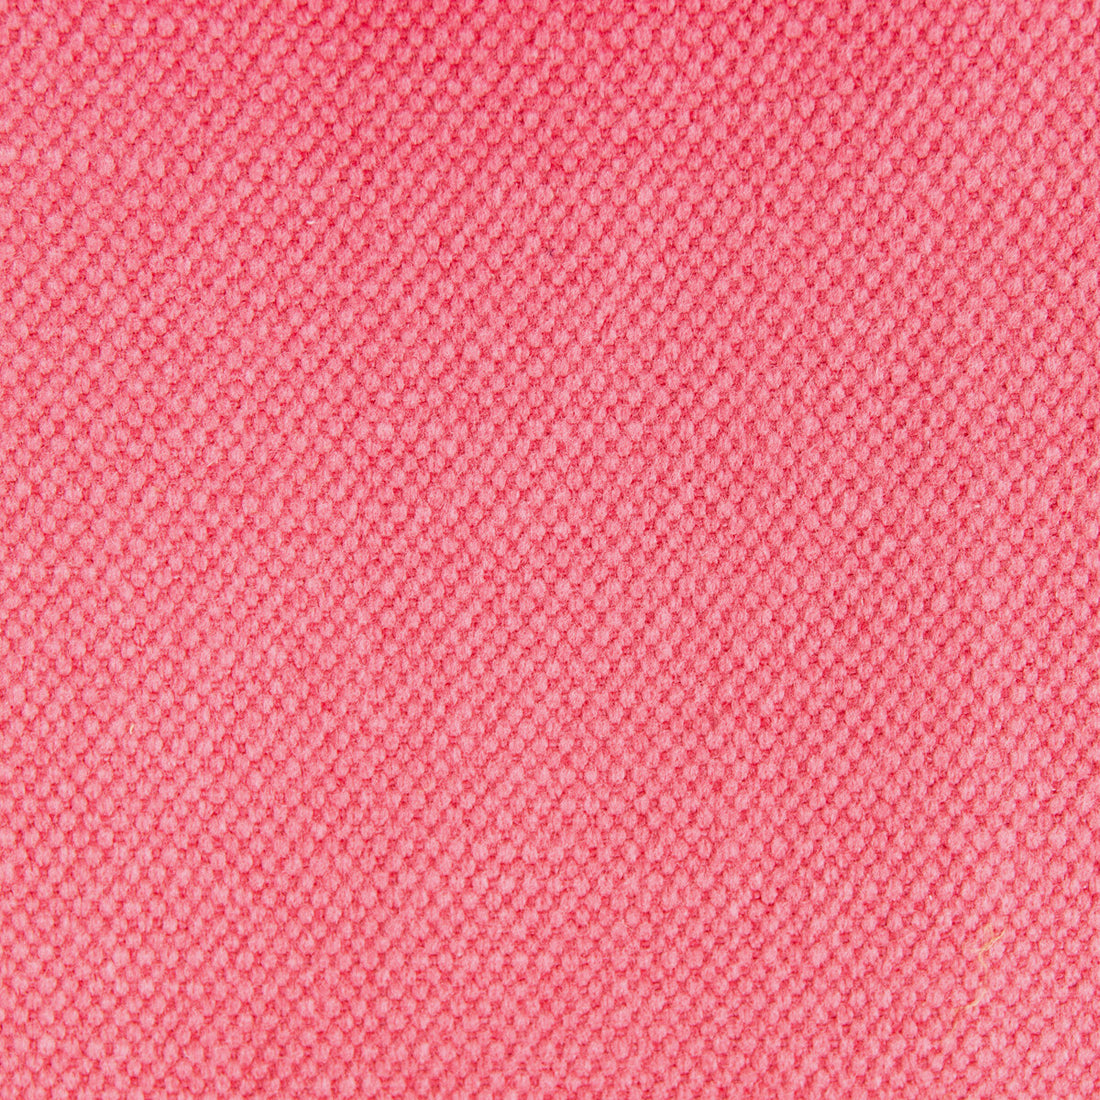 Lima fabric in rosa color - pattern GDT5616.016.0 - by Gaston y Daniela in the Gaston Nuevo Mundo collection